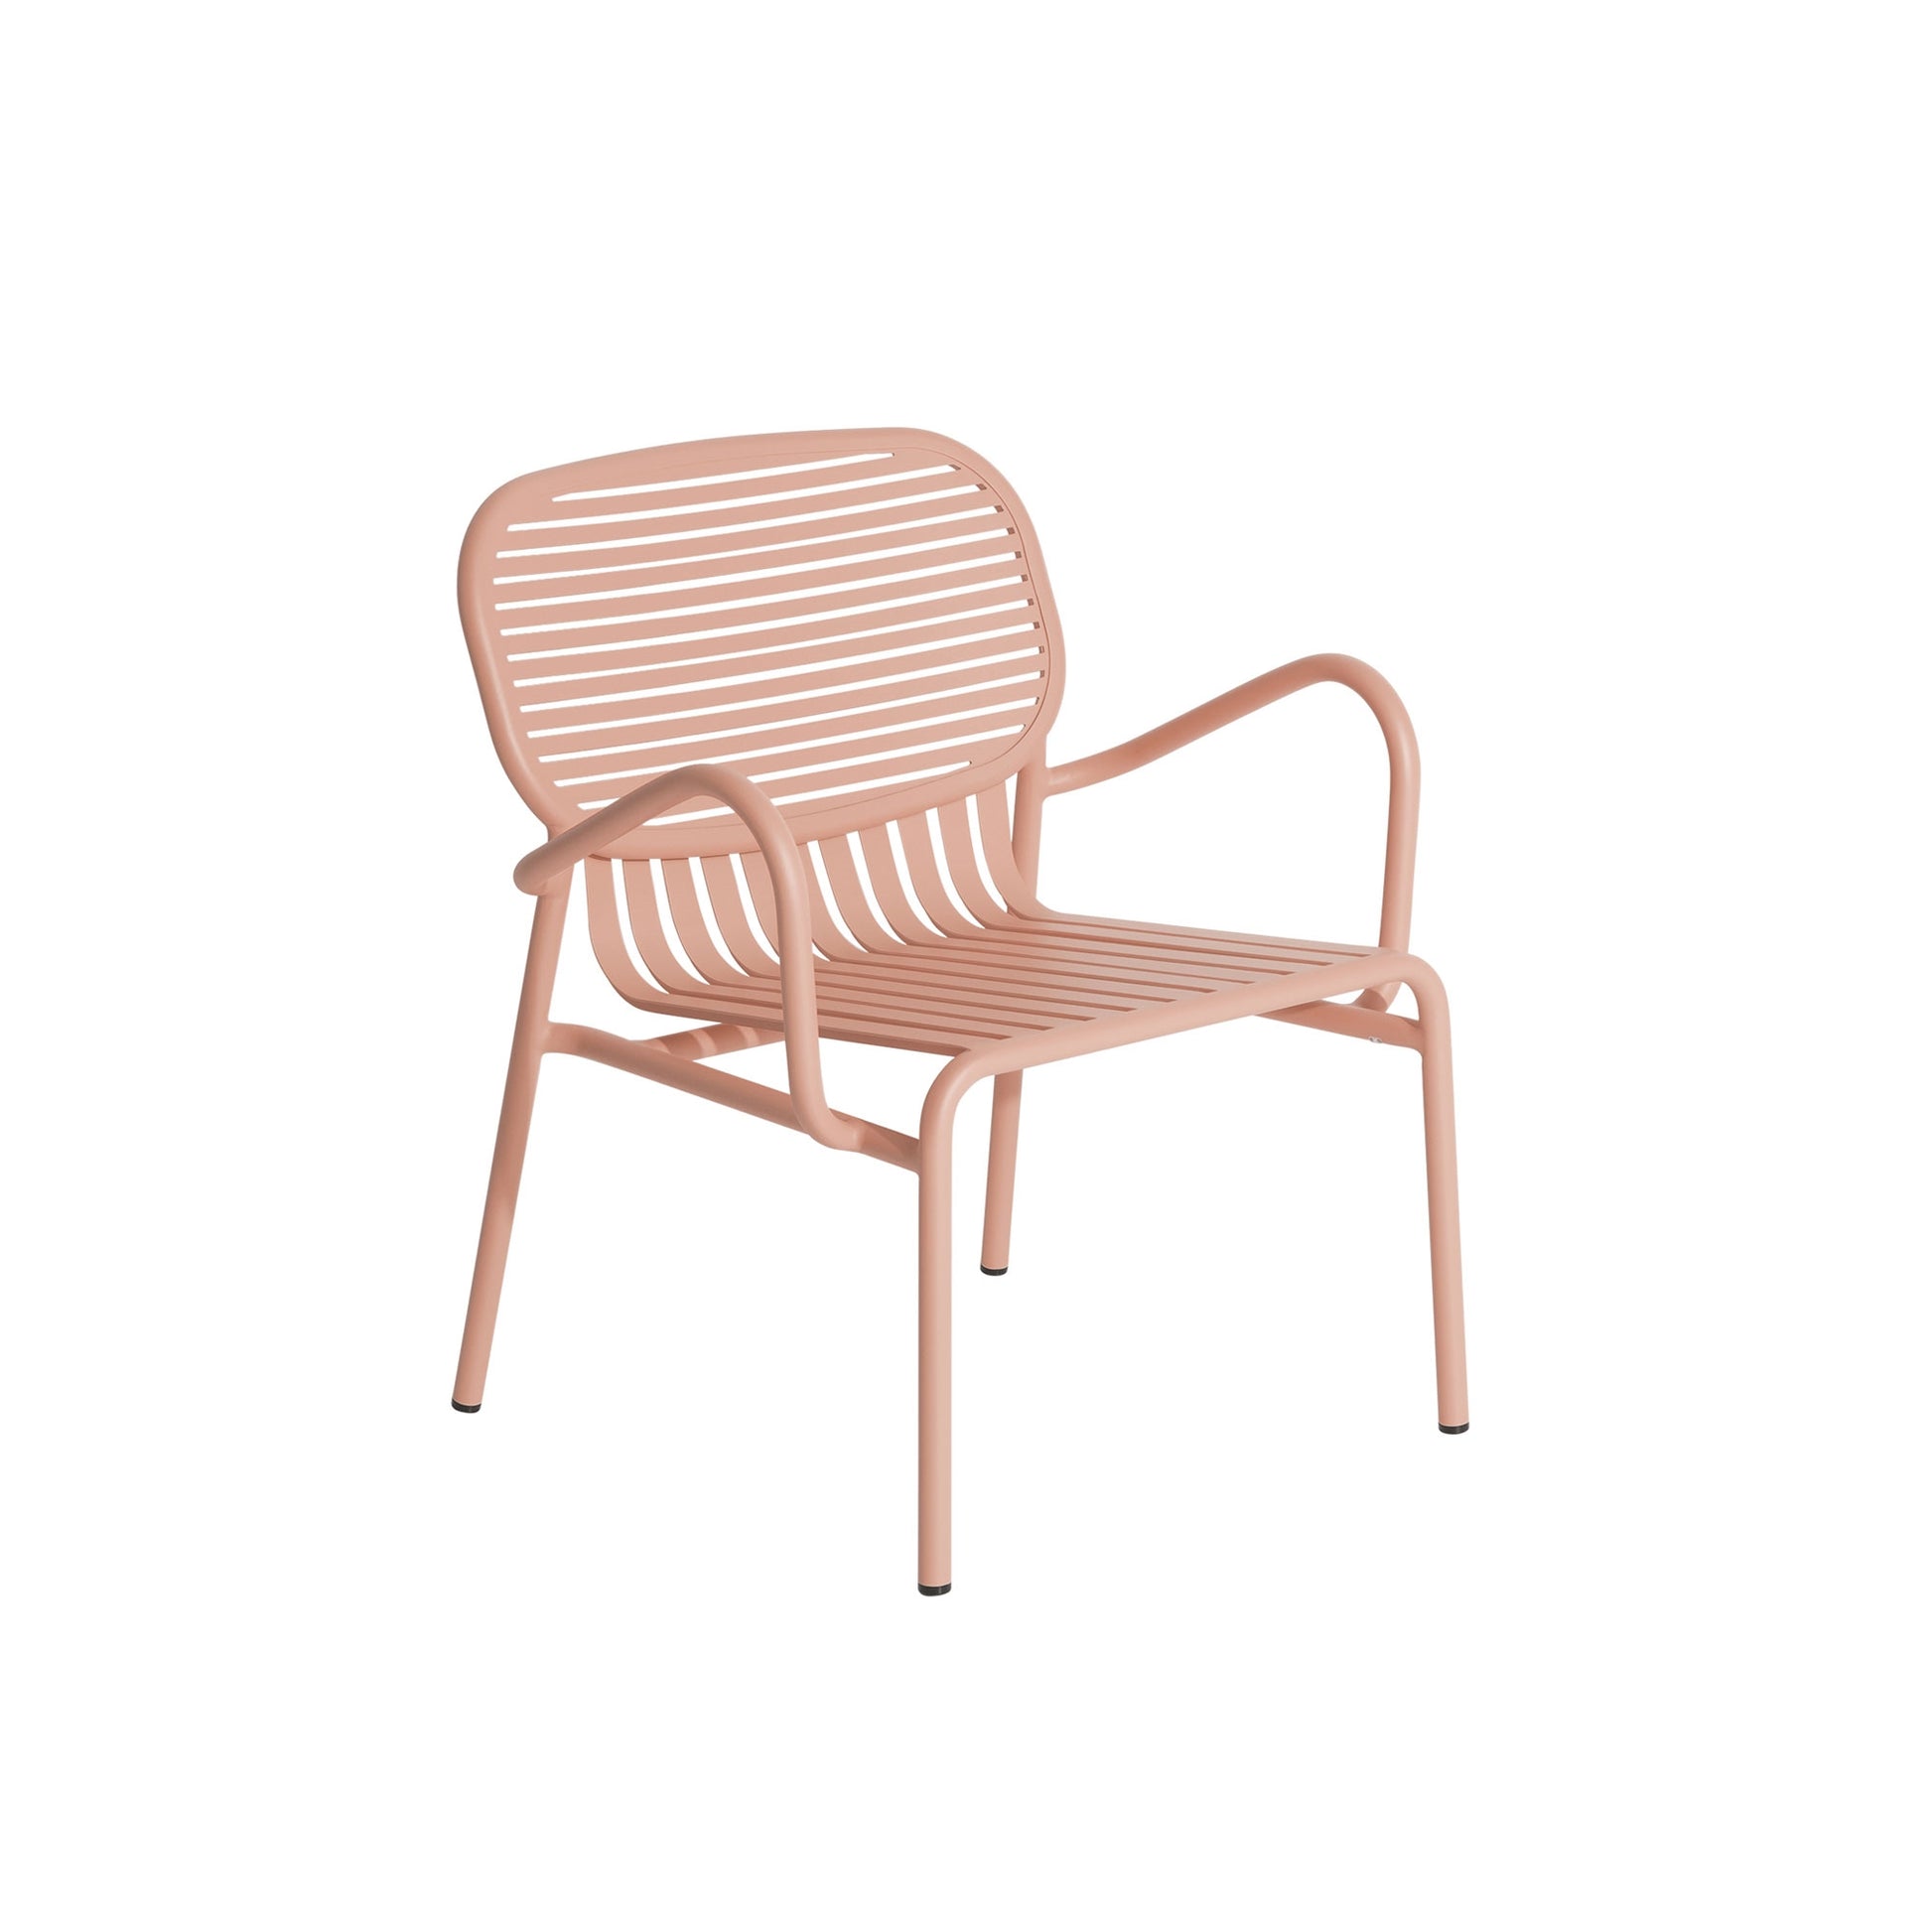 WEEK-END Armchair by Petite Friture #Blush